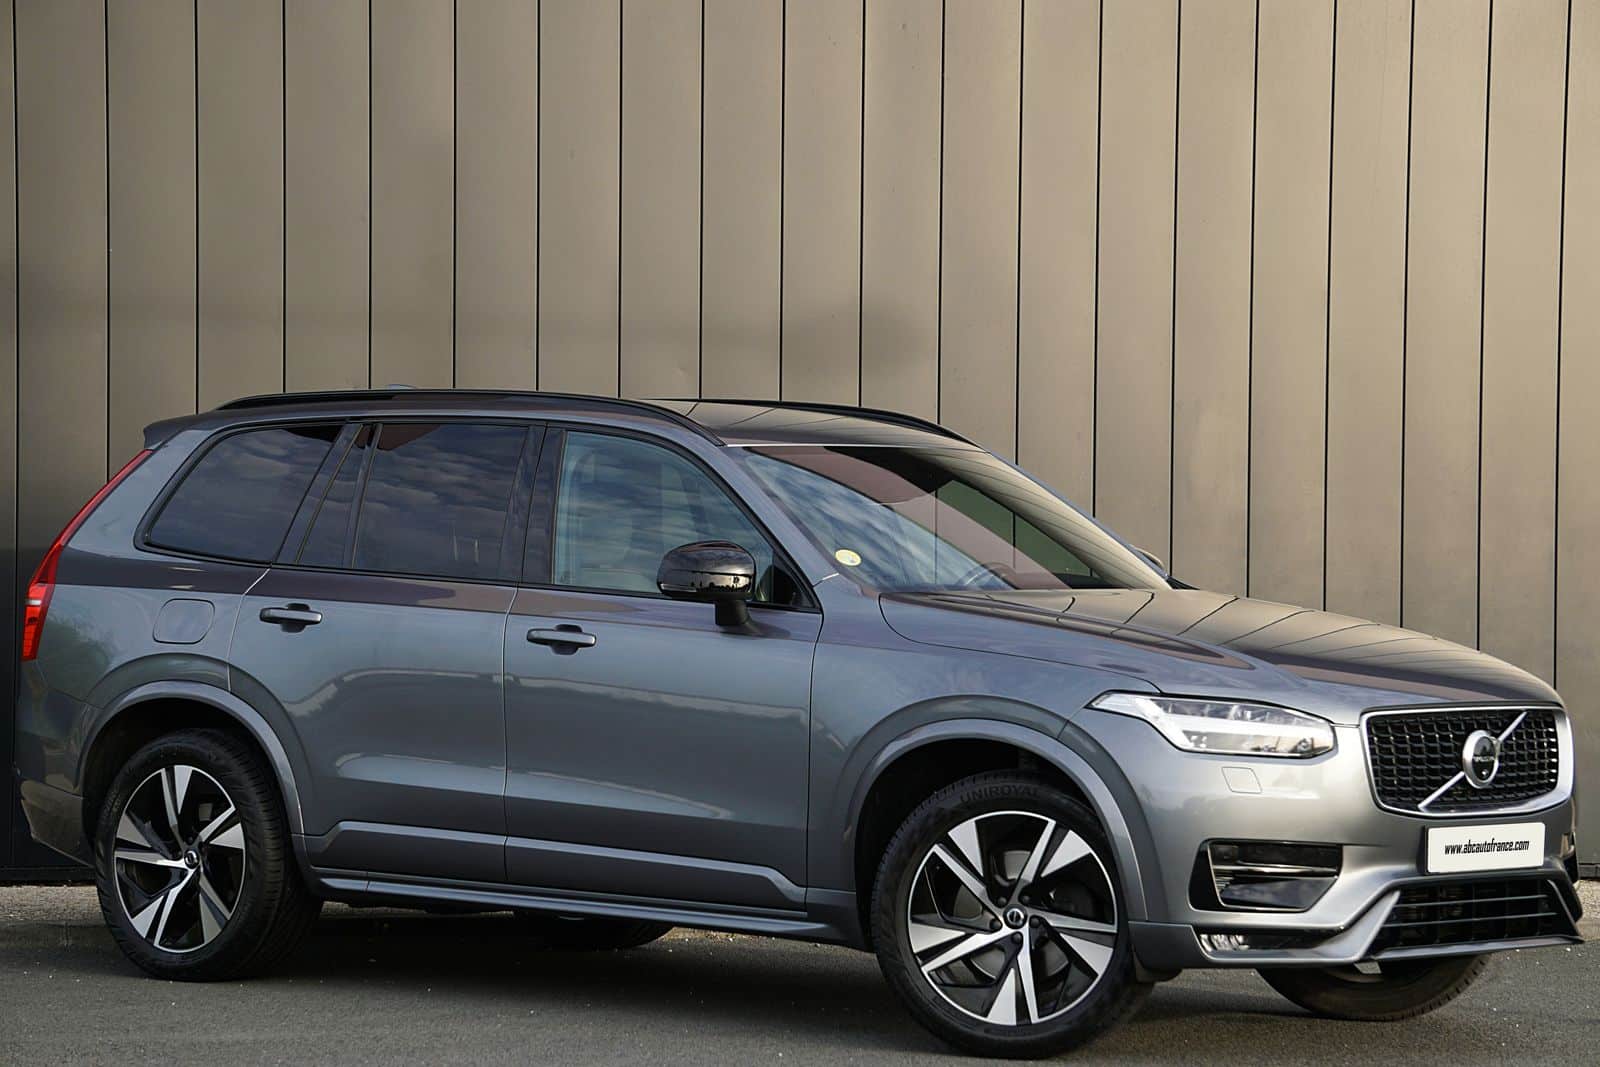 VOLVO XC90 (II) Phase II B5 AWD 235 CV R-Design Geartronic 5 places Occasion 79 abcautofrance (abc auto france) 3